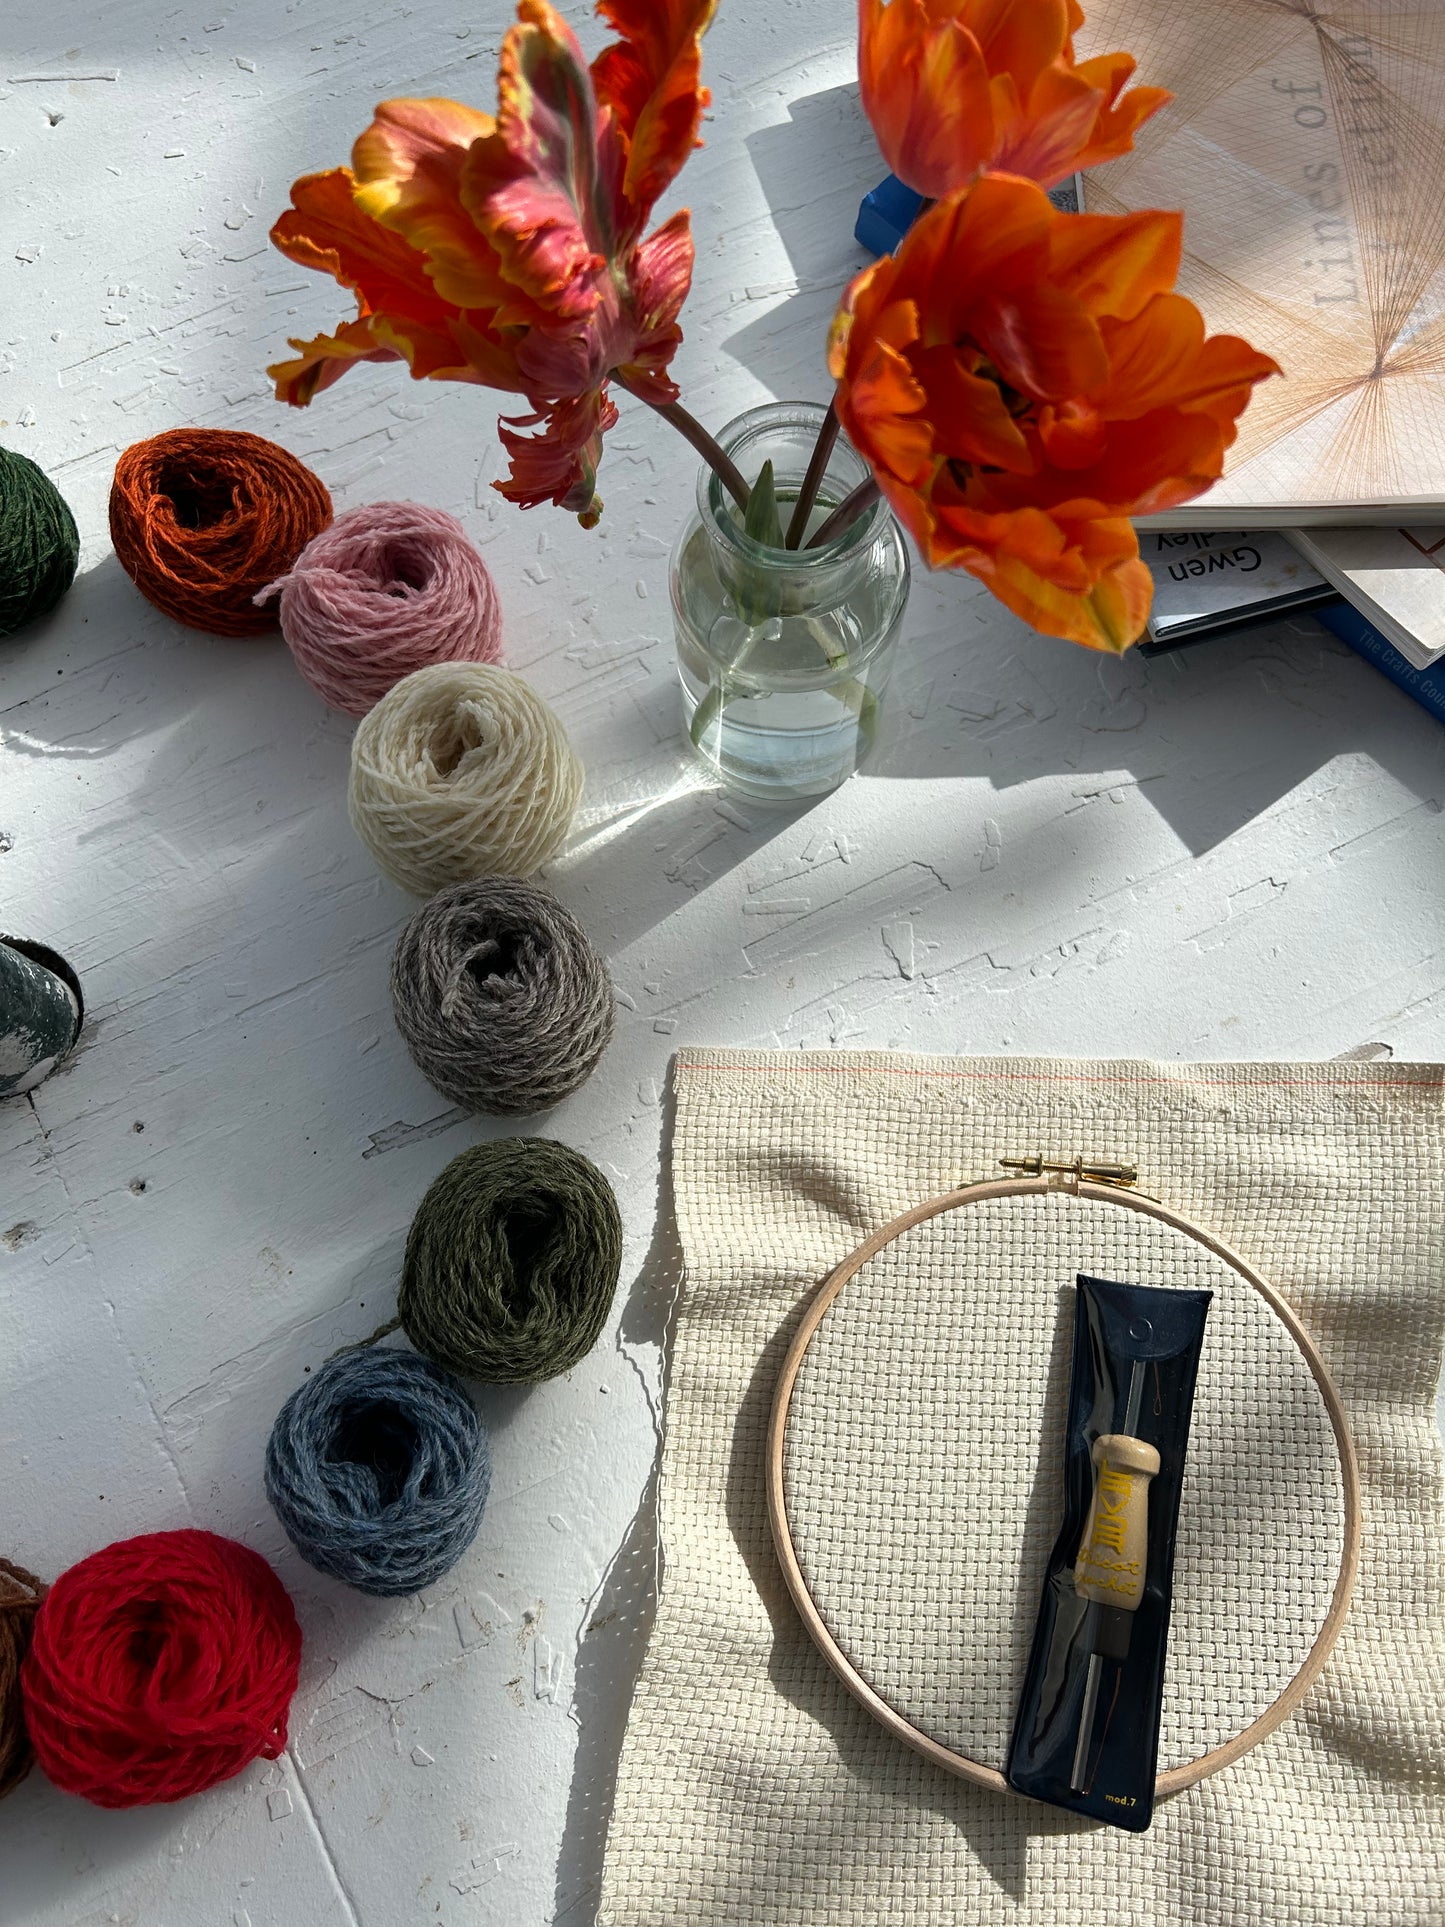 Punch Club - Punch needle embroidery workshop : 4th October 10am - 12.30pm